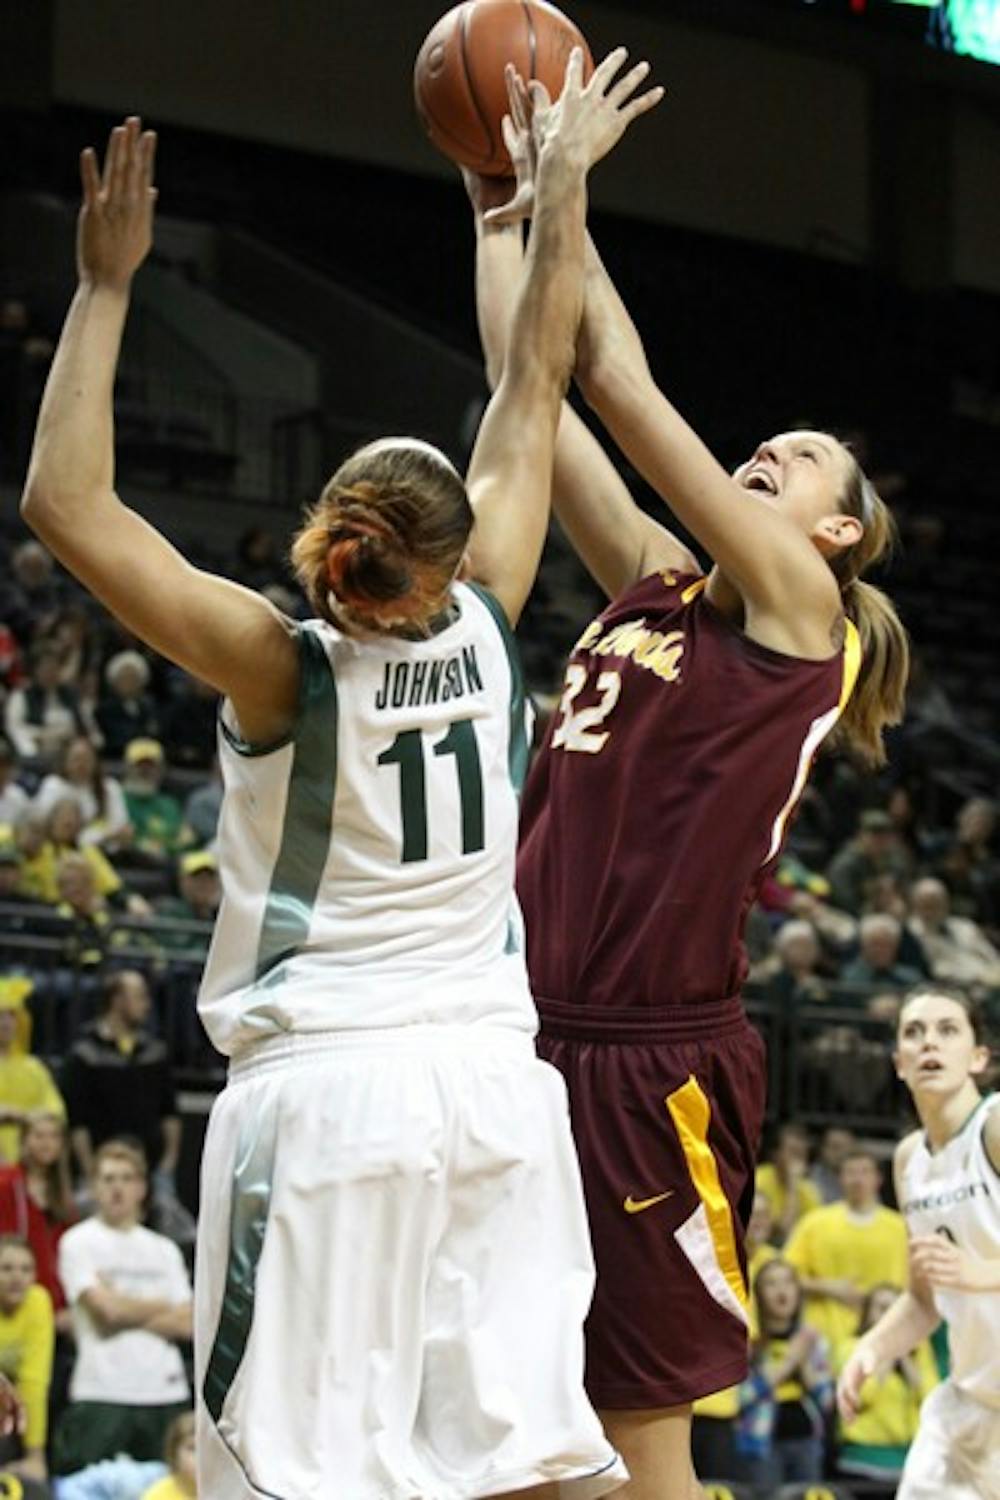 Scoring Barrage: ASU senior Becca Tobin attempts a layup over Oregon junior forward Amanda Johnson during the Sun Devils 75-66 victory over the Ducks in Eugene. Tobin scored 15 points in the game, which was good for third best on the team. (Photo Courtesy of Steve Rodriguez)